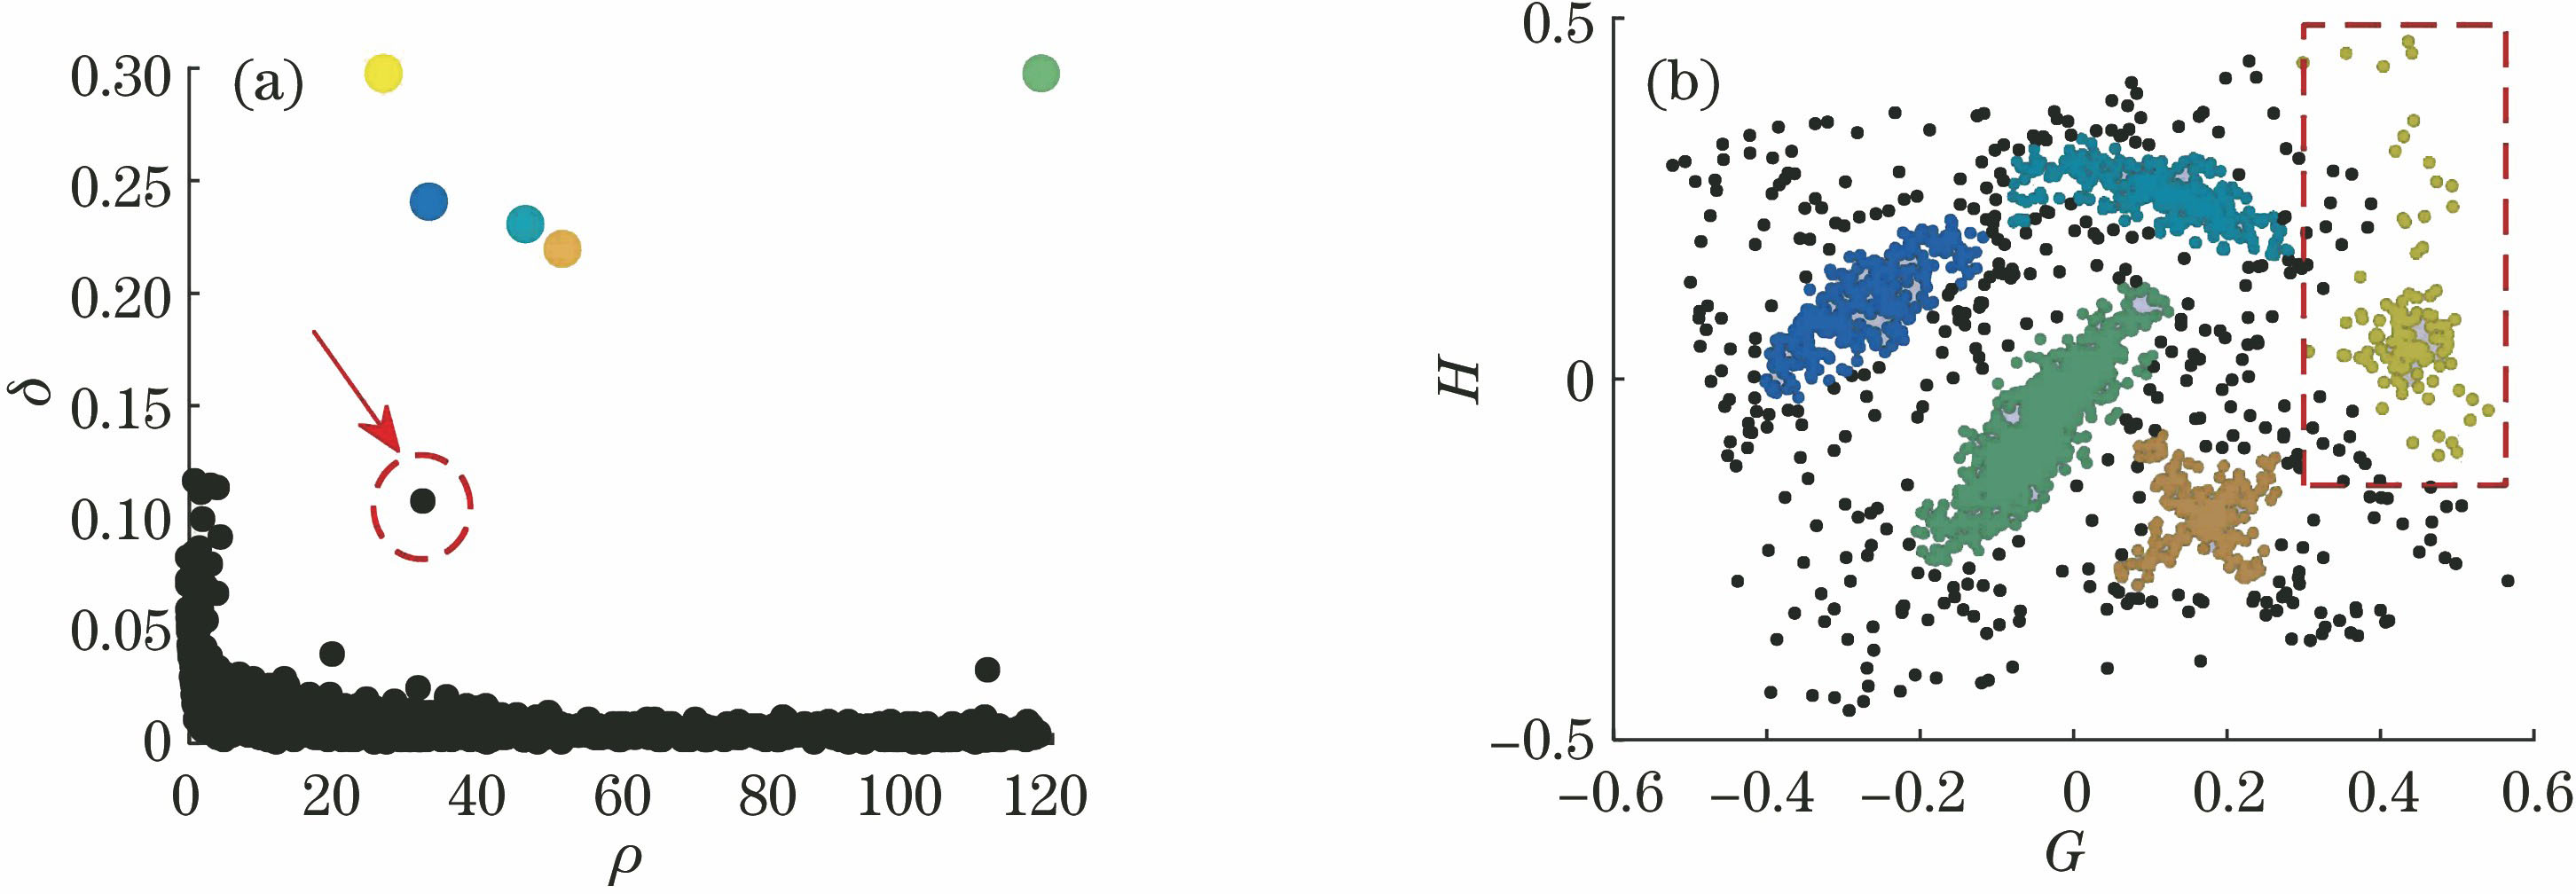 Experimental results of basic density peak algorithm(dc=1.8). (a) Decision graph; (b) clustering results